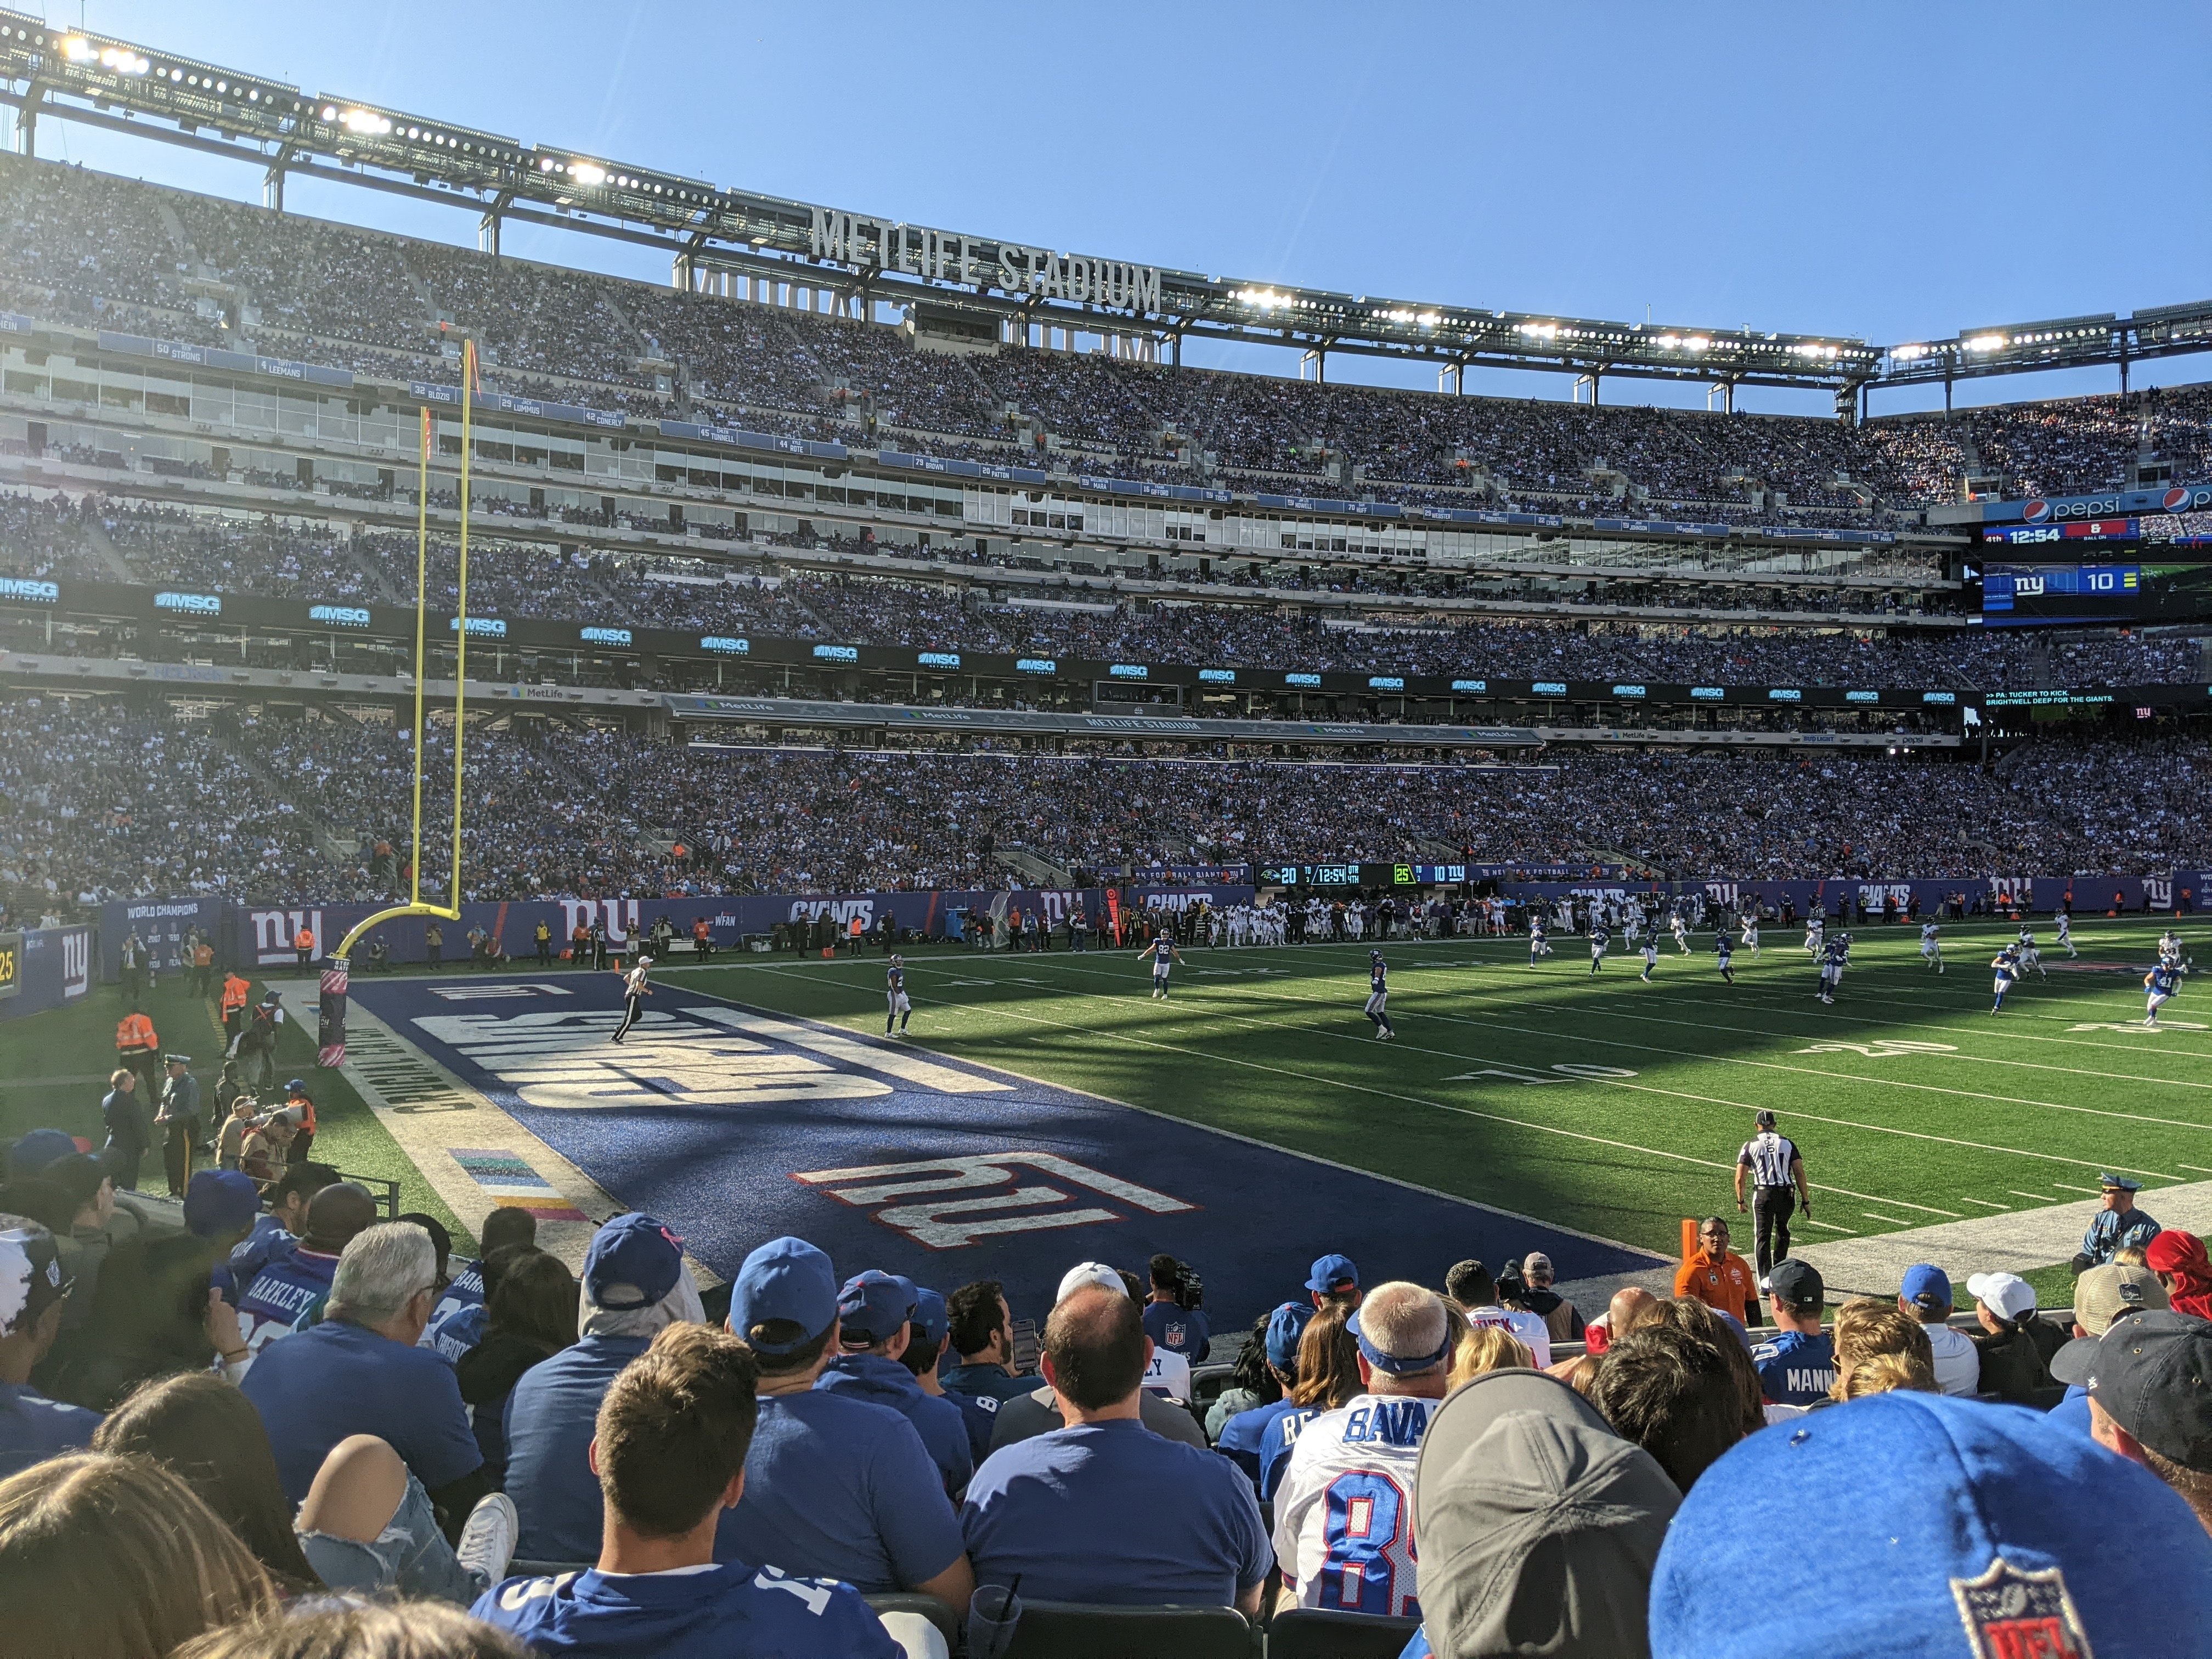 Fans at a New York Giants game.